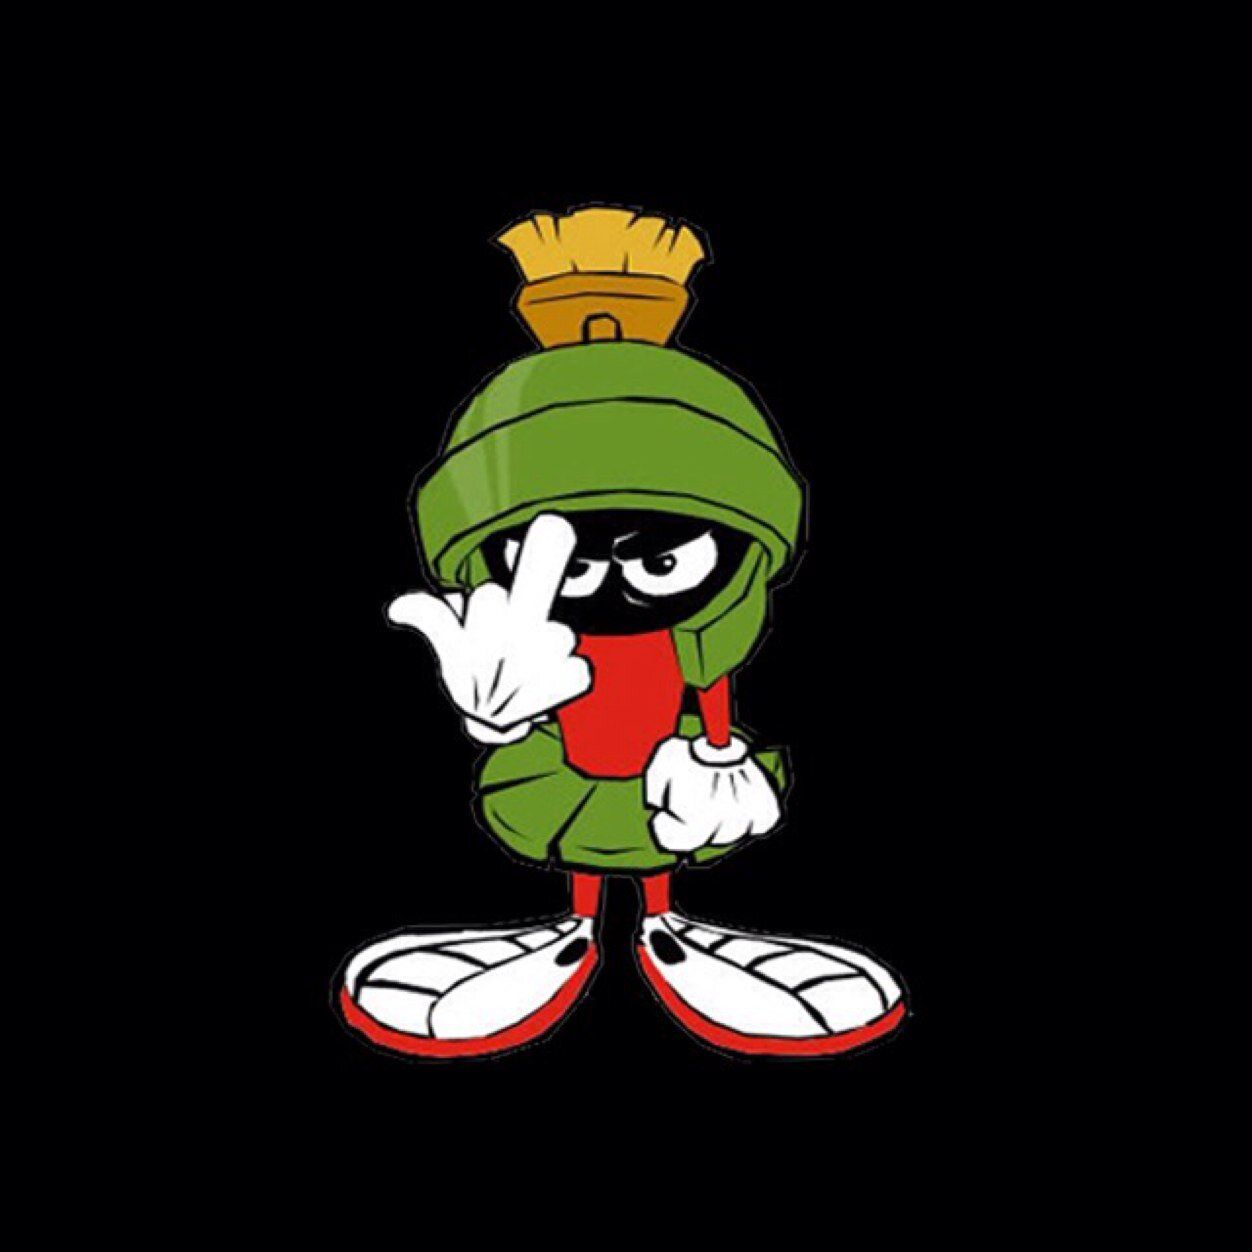 Iphone Marvin The Martian - HD Wallpaper 